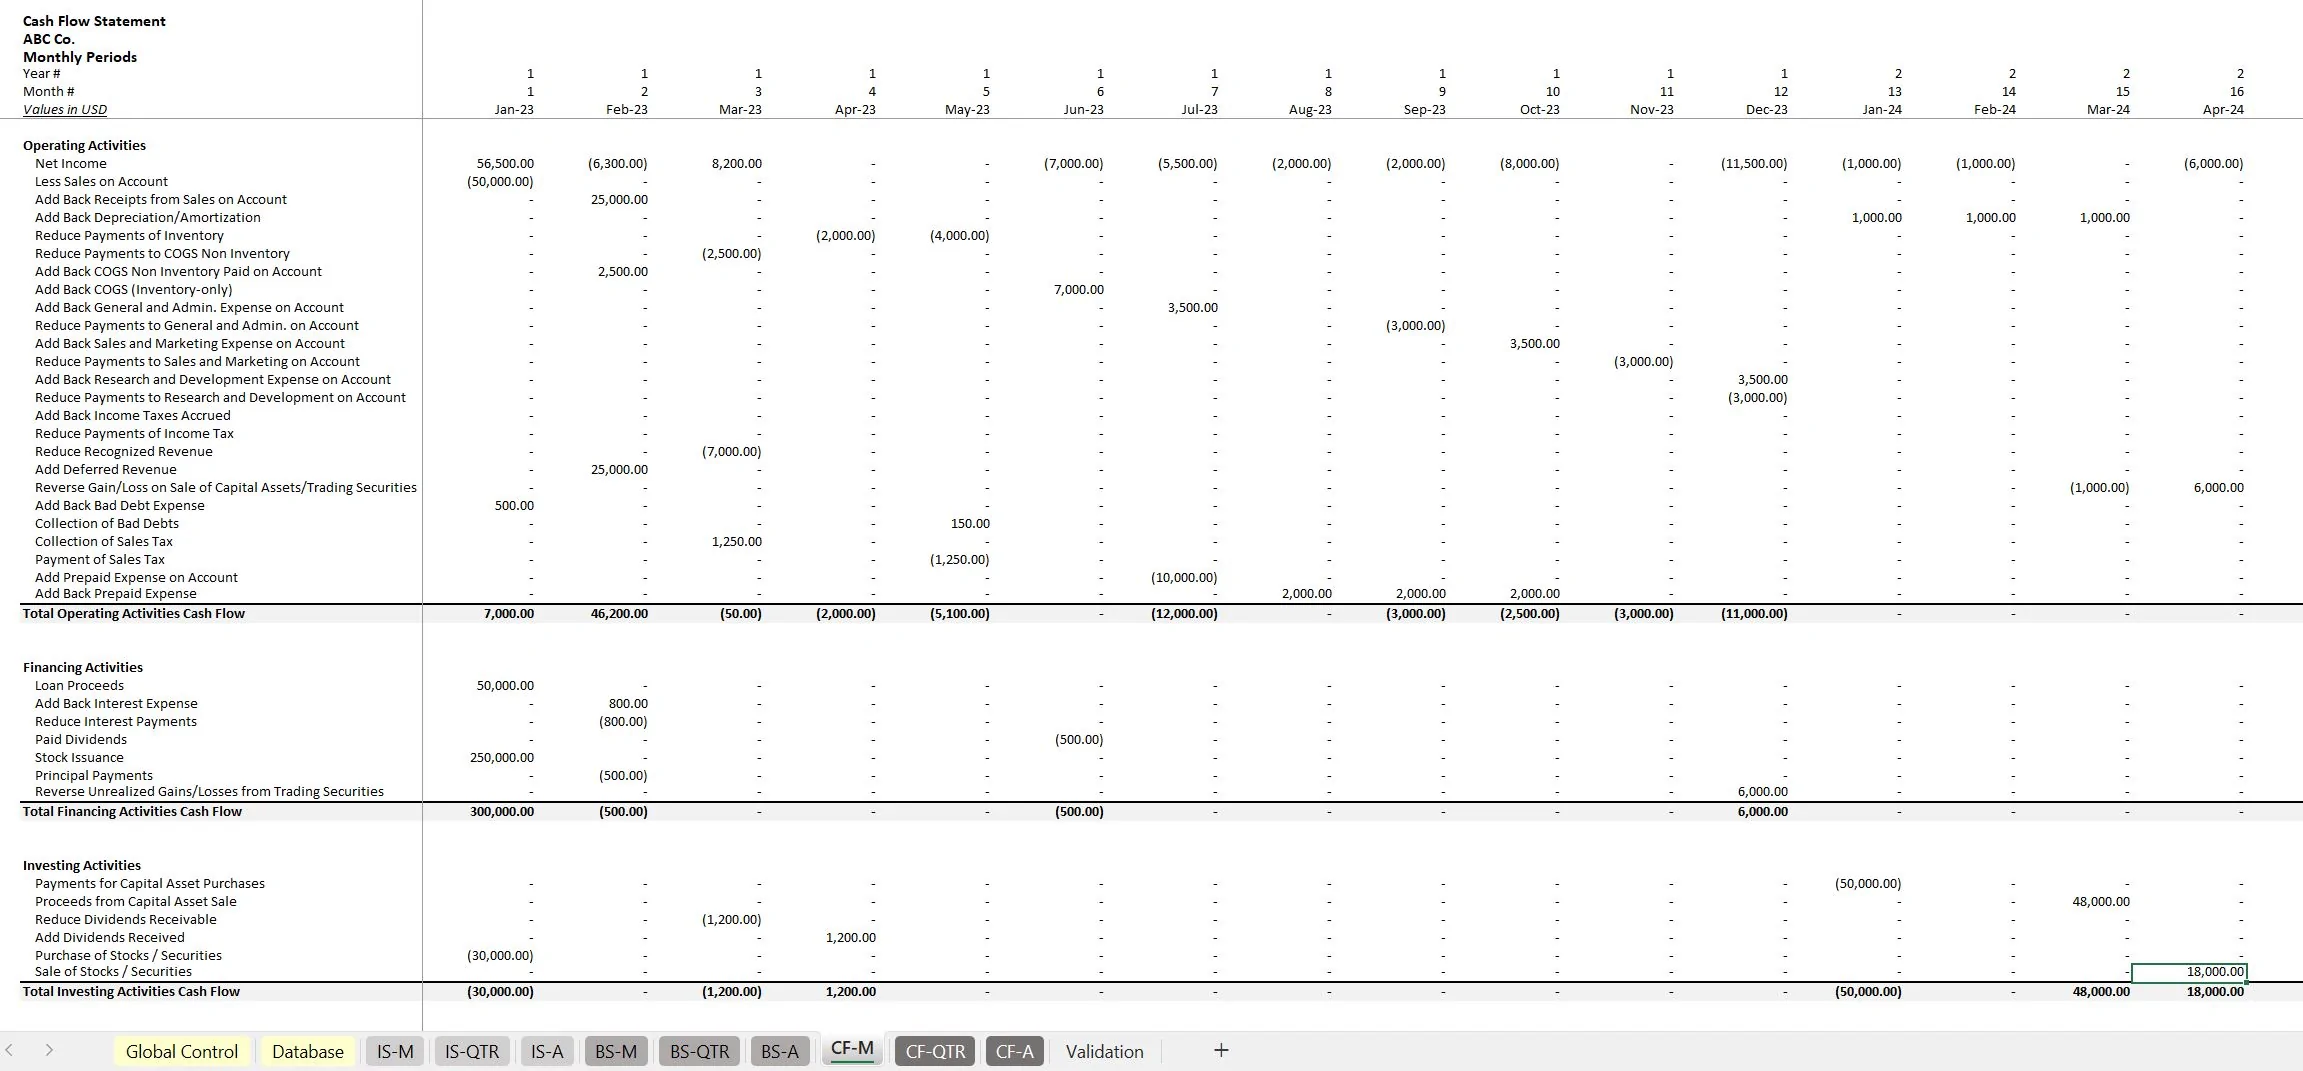 Financial Statement Generator: Cash or Accrual Basis (Excel workbook (XLSX)) Preview Image